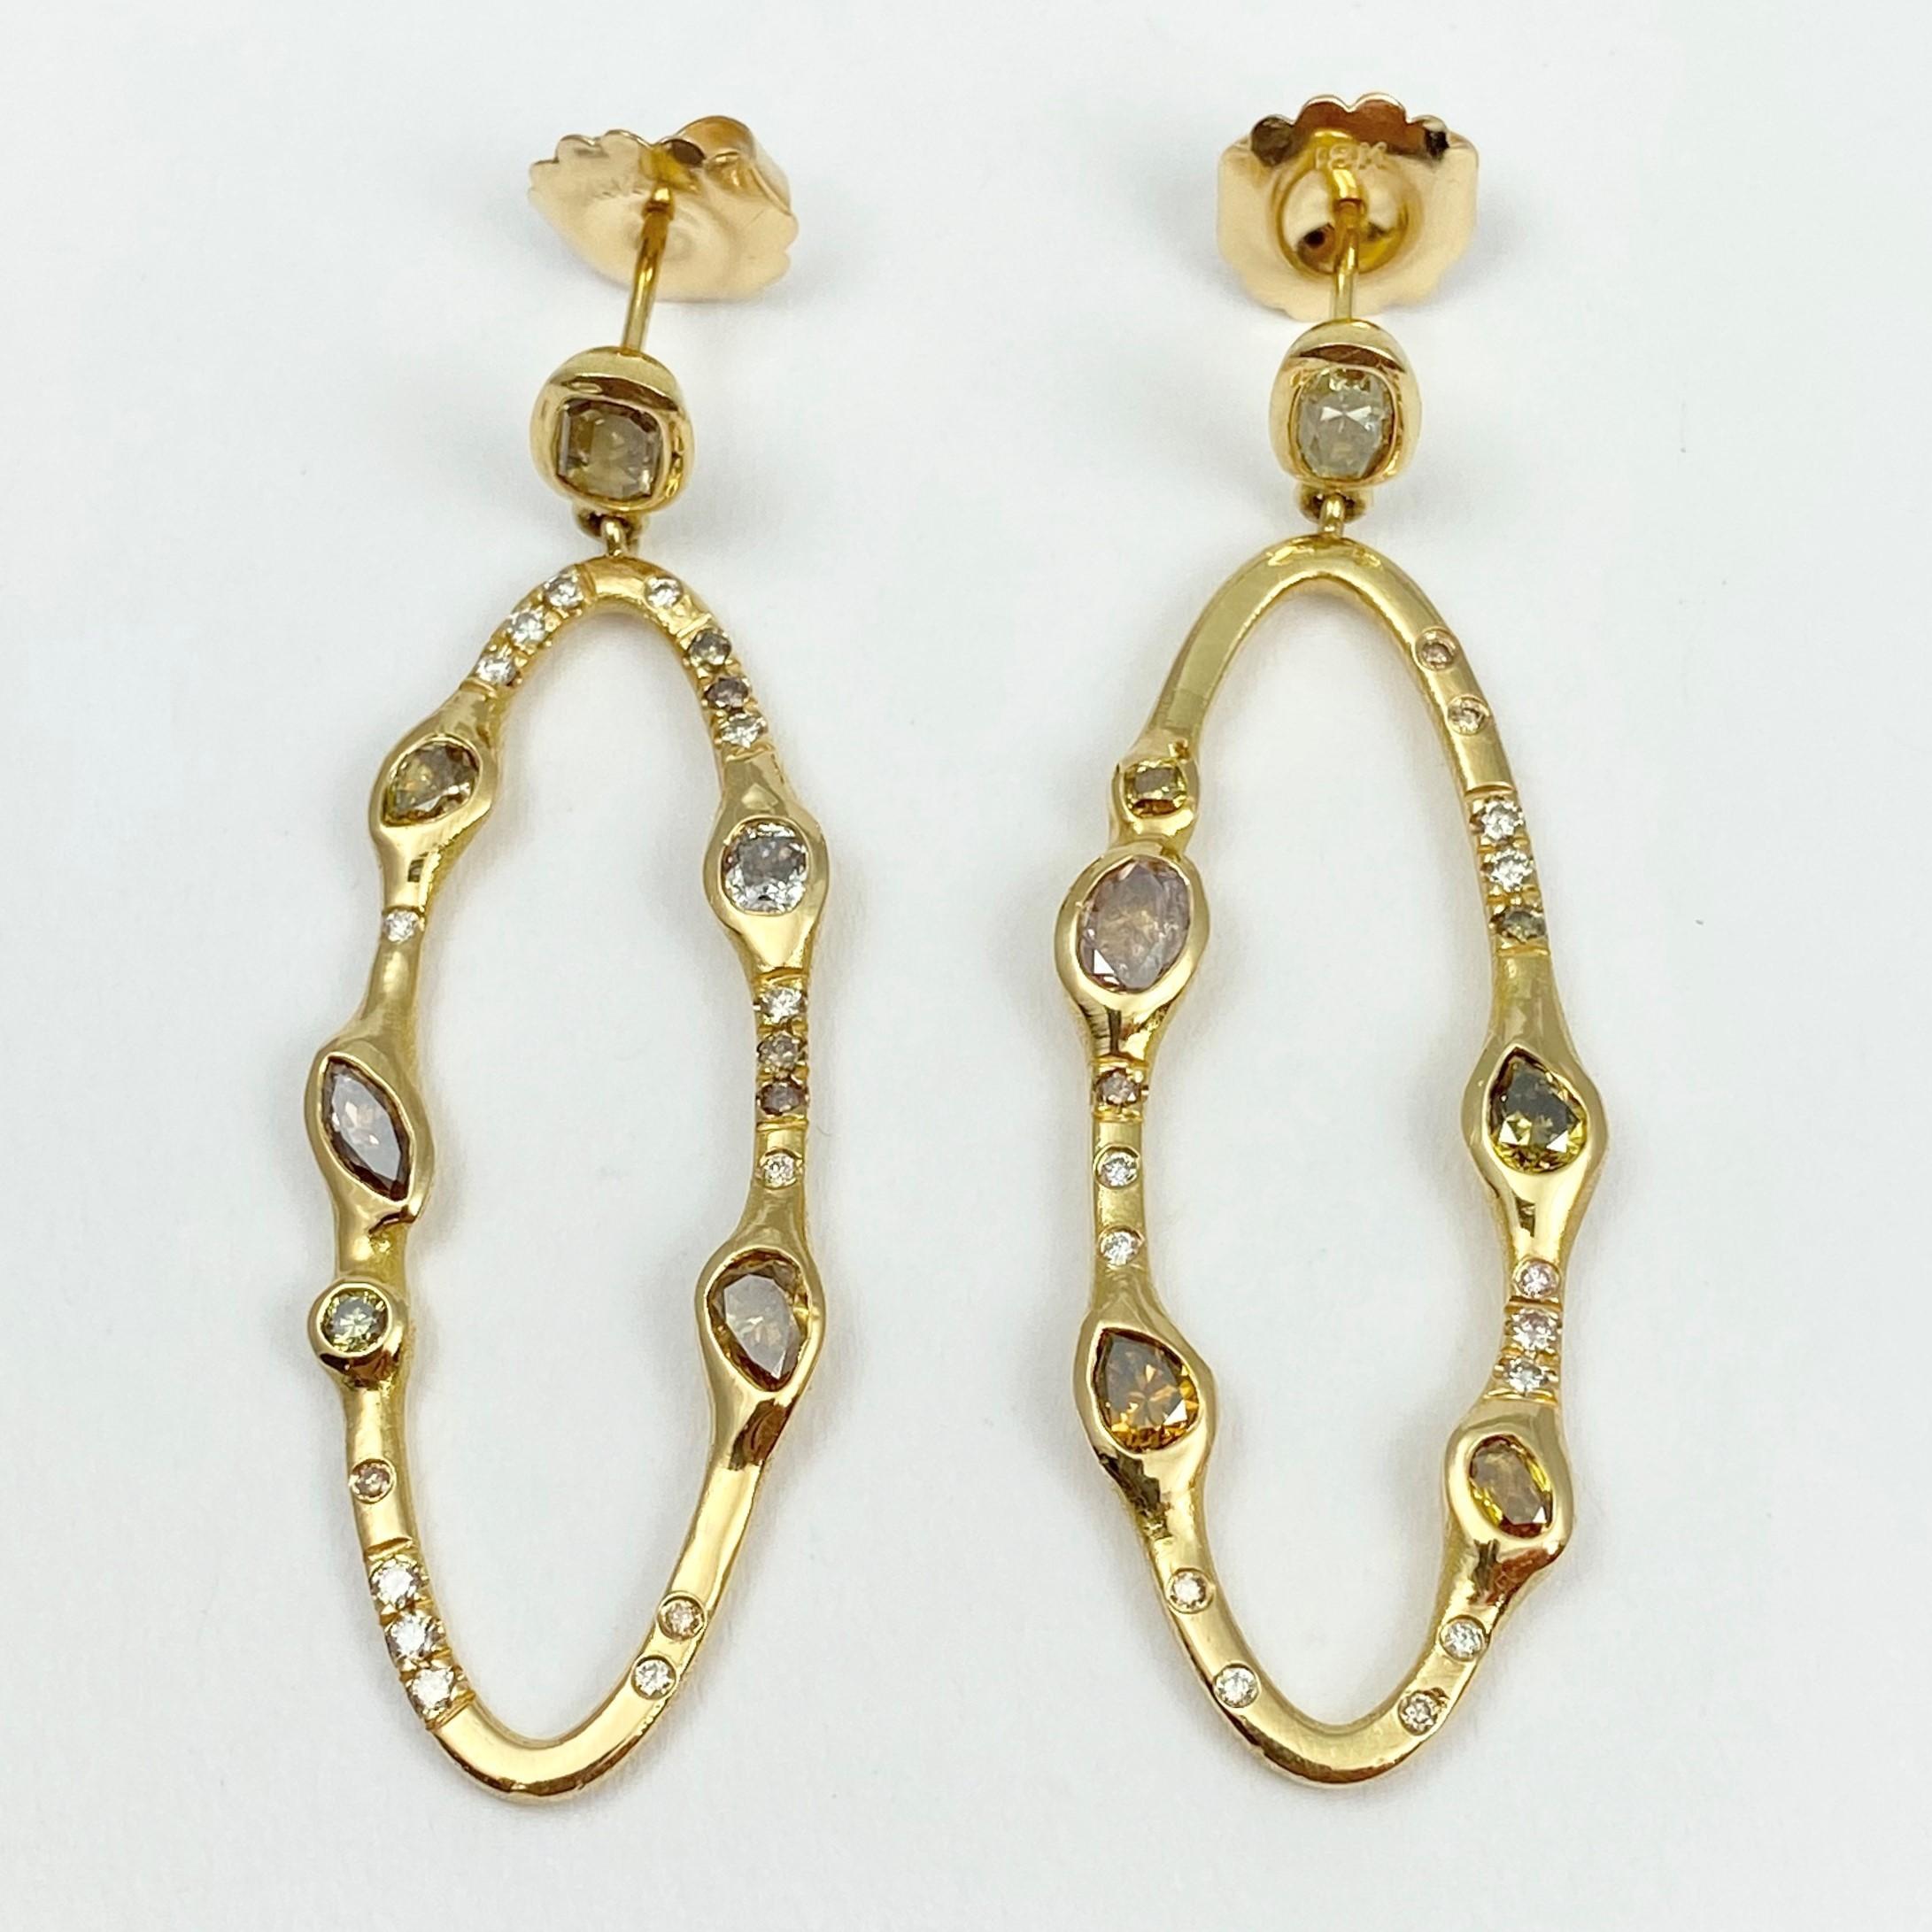 The larger size Pathway oval earrings are hand-crafted with 18-karat recycled yellow gold, and feature 12 bezel set, colored diamonds (four pear shape, three oval, two cushion, one marquise, one round, and one step-cut); and 33 round champagne